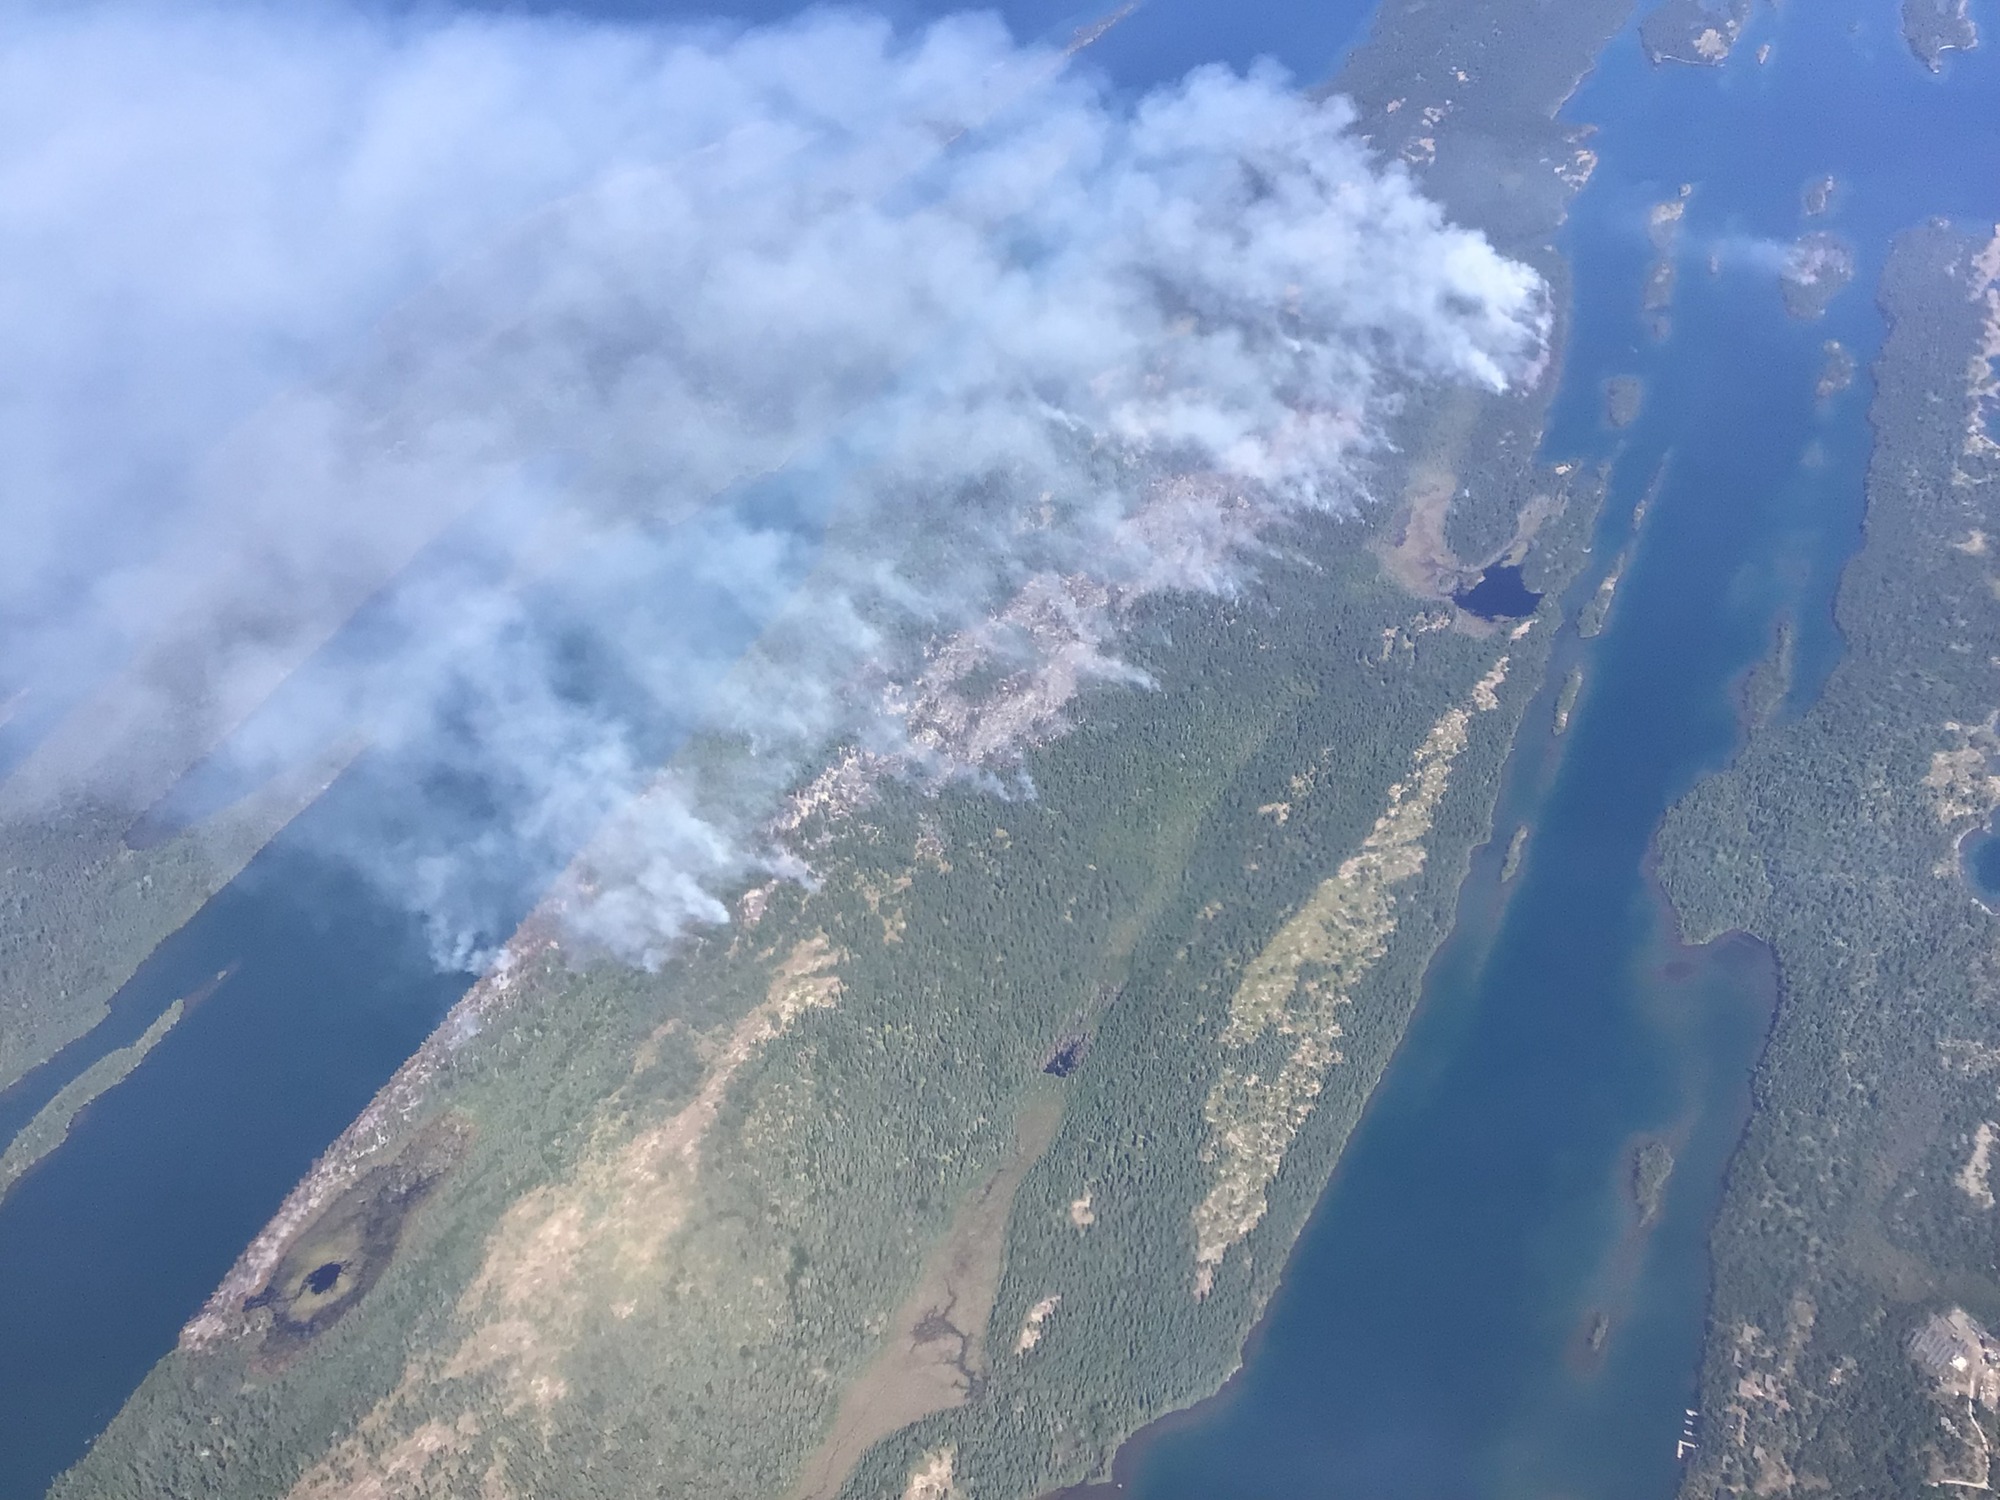 An aerial view of smoke billowing into the sky from a large island.